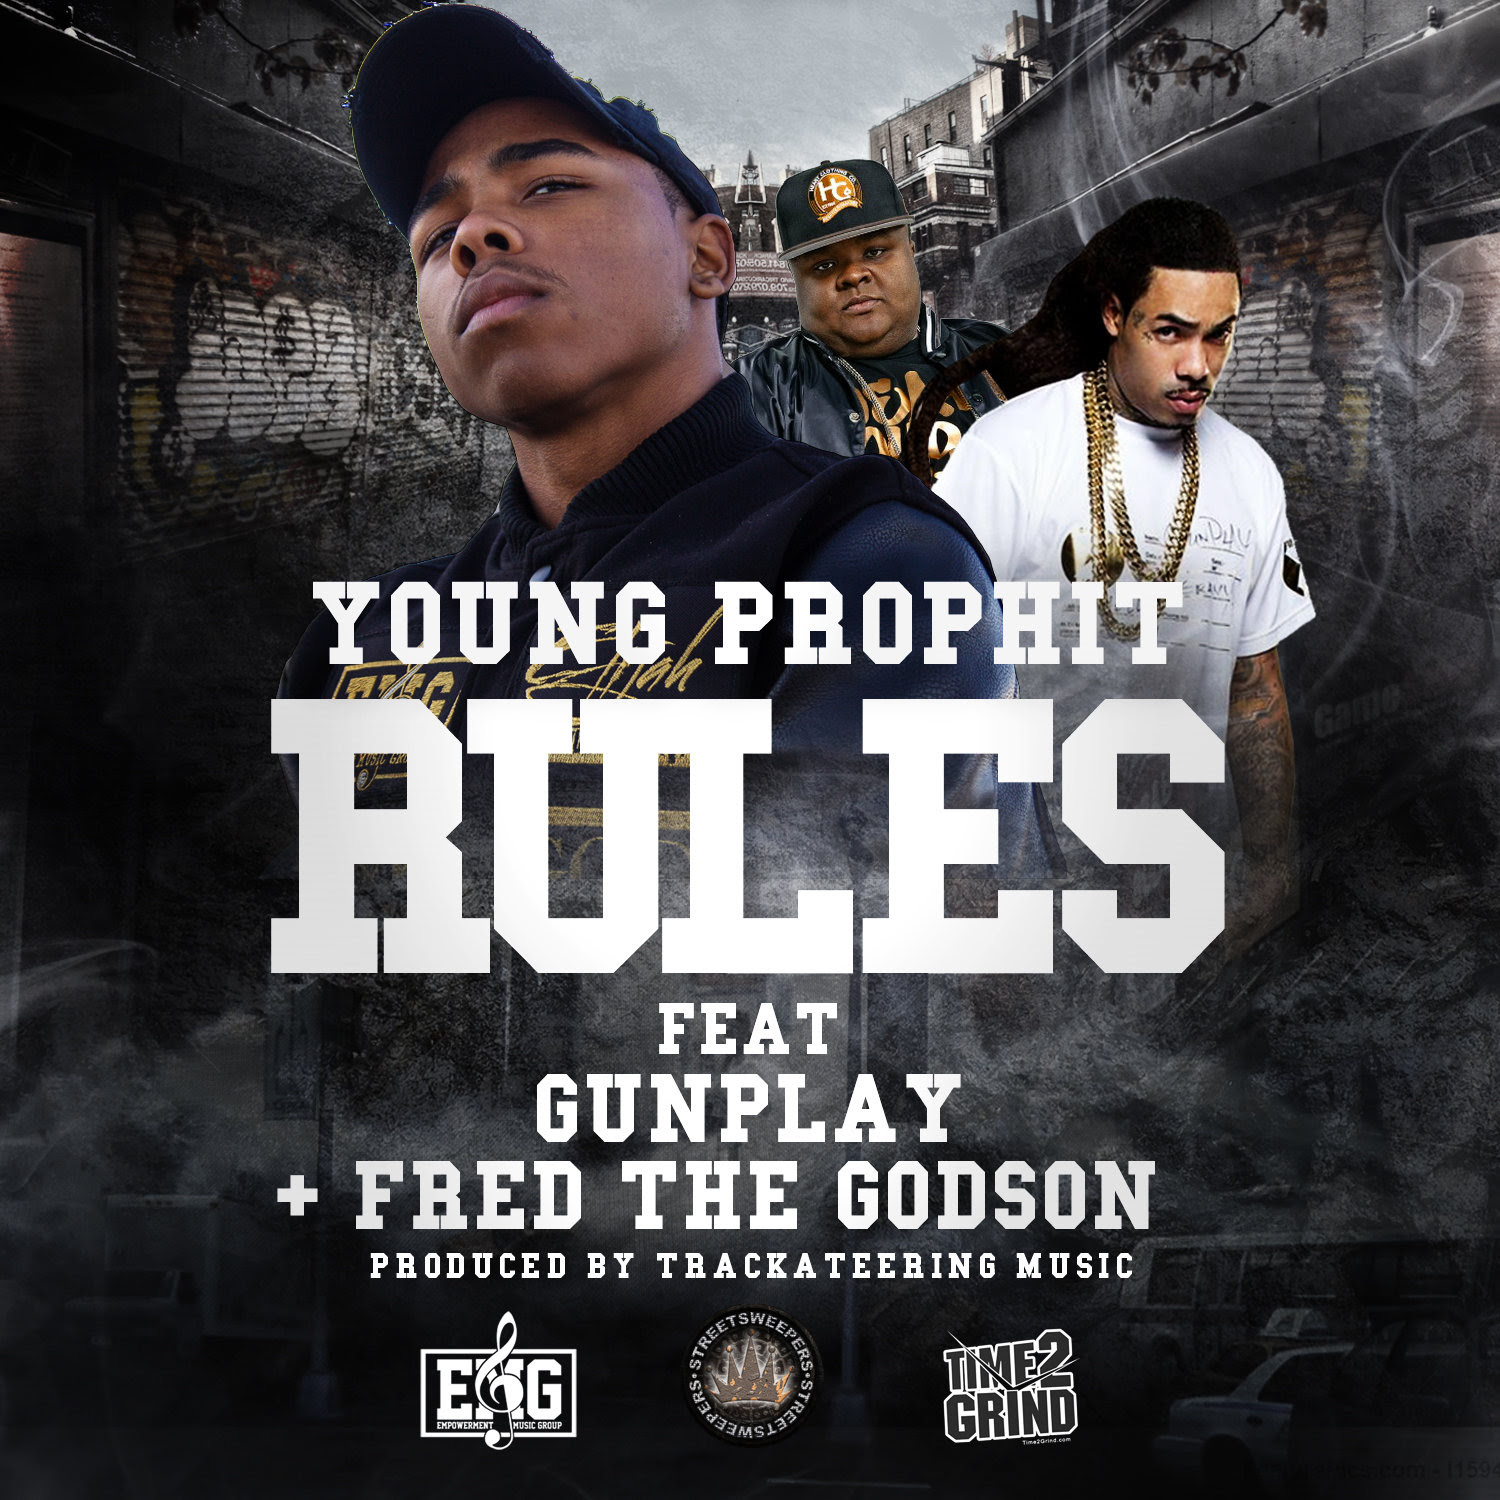 The Rules – Elijah “The Young Prophit” ft. GunPlay, Fred The Godson @iamyoungprophit